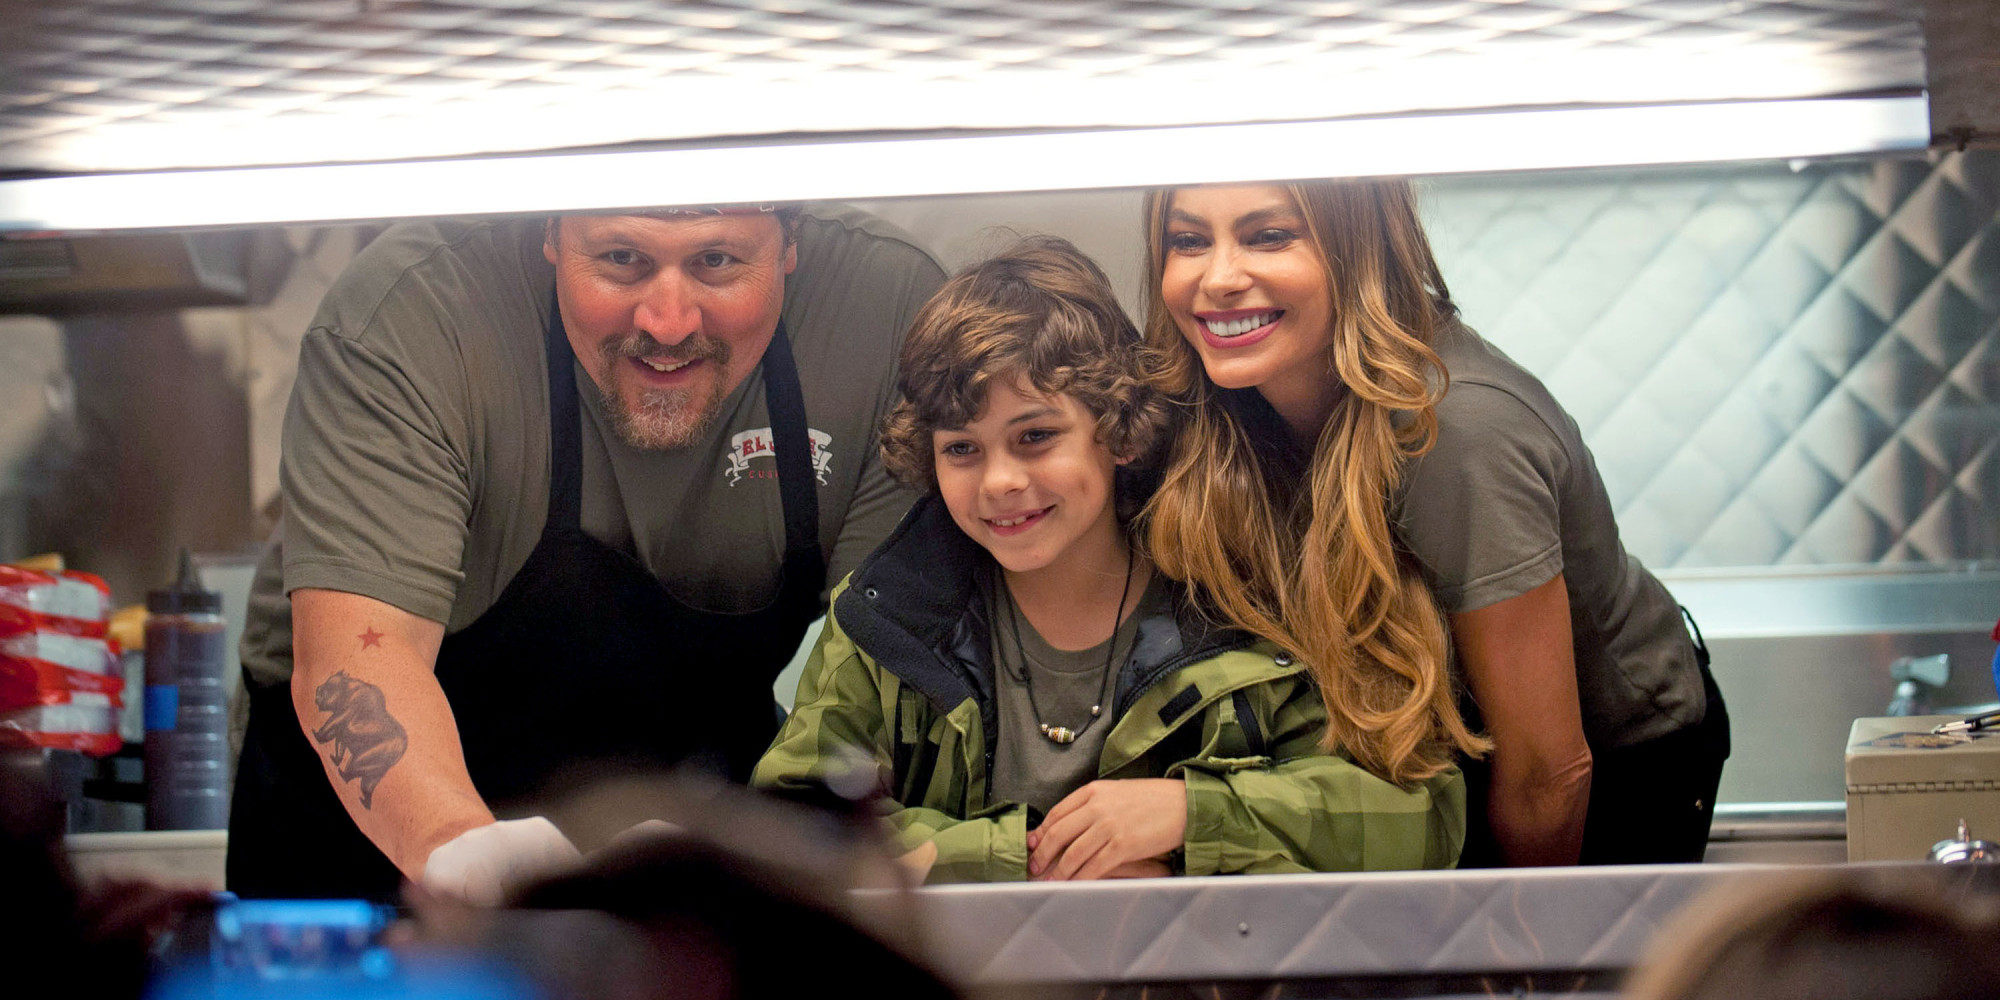 (From left) Jon Favreau, Emjay Anthony and Sofia Vergara in a still from Chef (2014). Food waste pioneer Carla Martinesi explains how the movie changed her life. Photo: Open Road Films